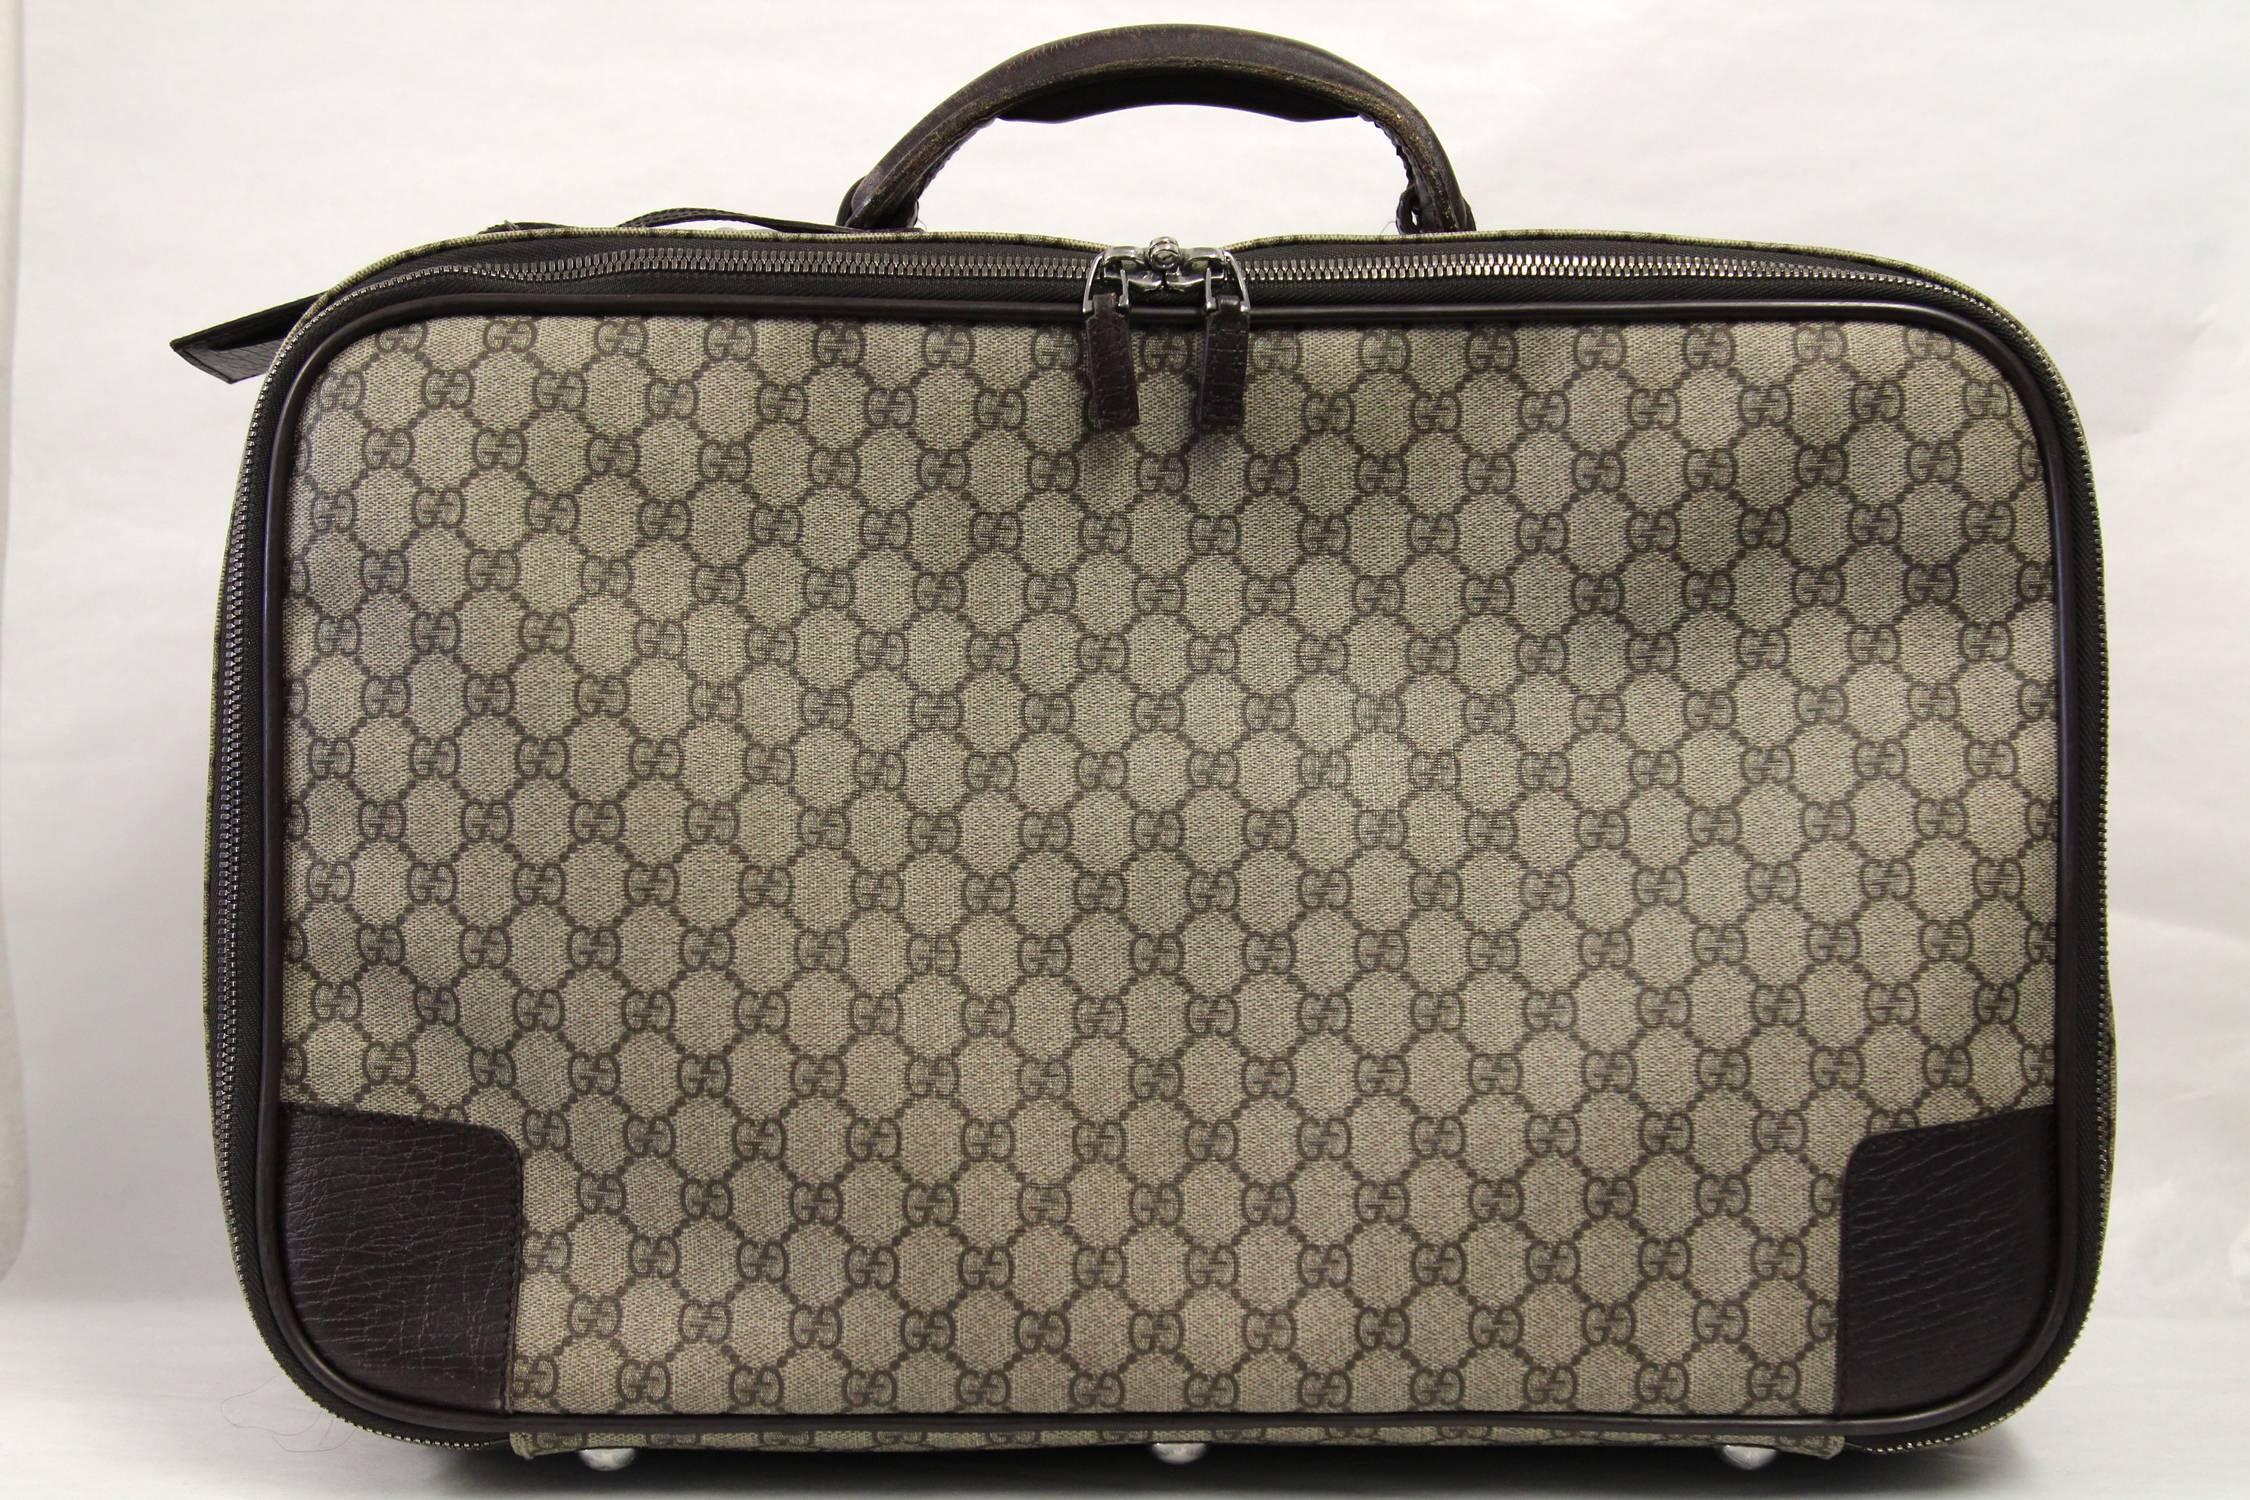 Amazing Gucci logo suitcase, in canvas and leather. Overall, the conditions are good. Some light scratches on the top handle.
The item dates back to the early 2000s.

Measurements:

48 cm x 29 cm x 16 cm